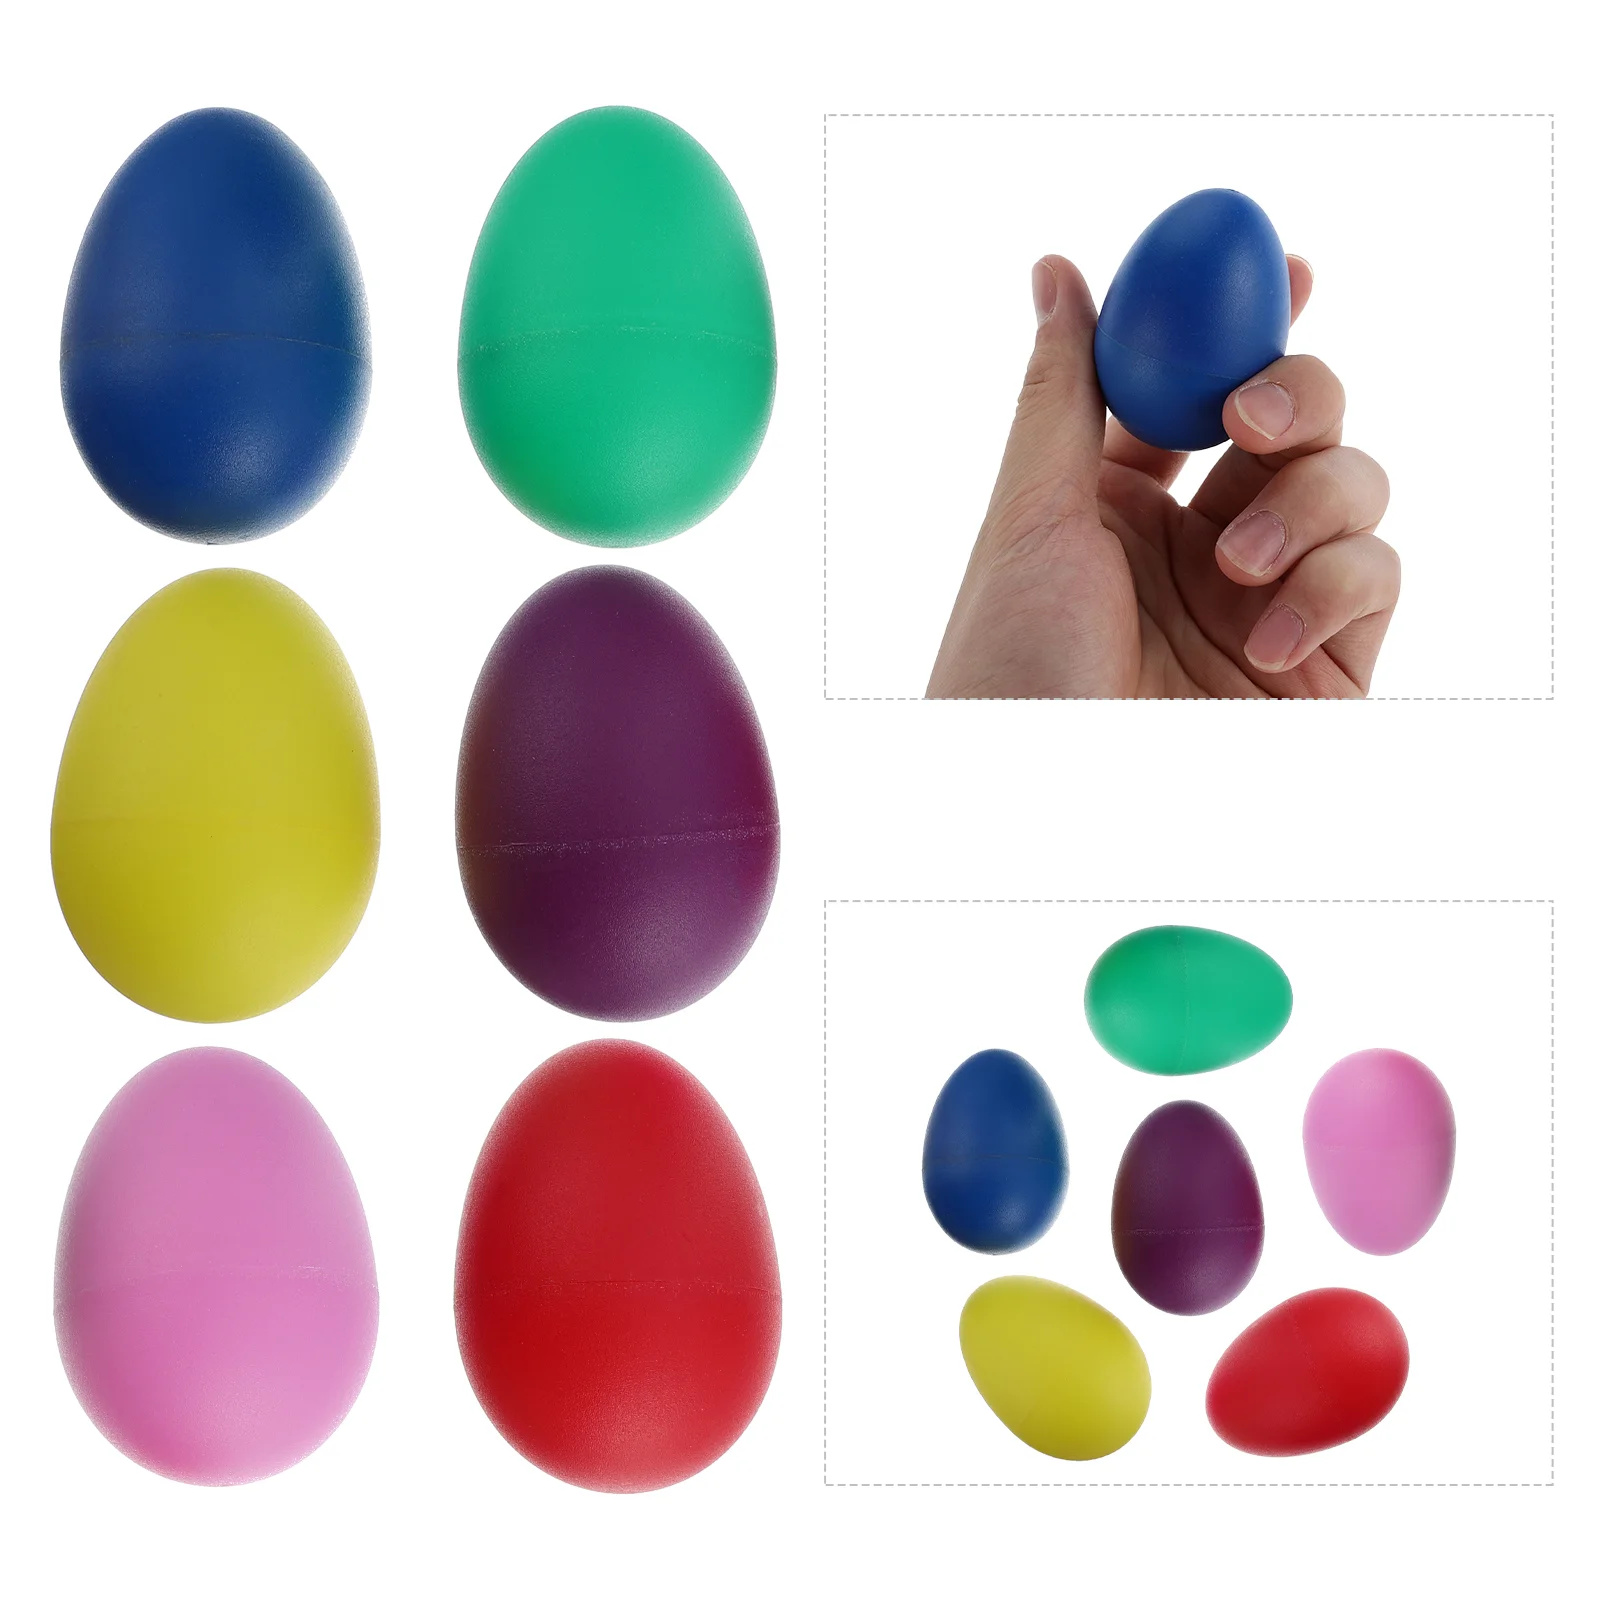 

Egg Musical Percussion Maracas Shakers Maraca Shaker Kids Child Gift Toys Eggs Party Supplies Colorful Easter Learning Music Diy